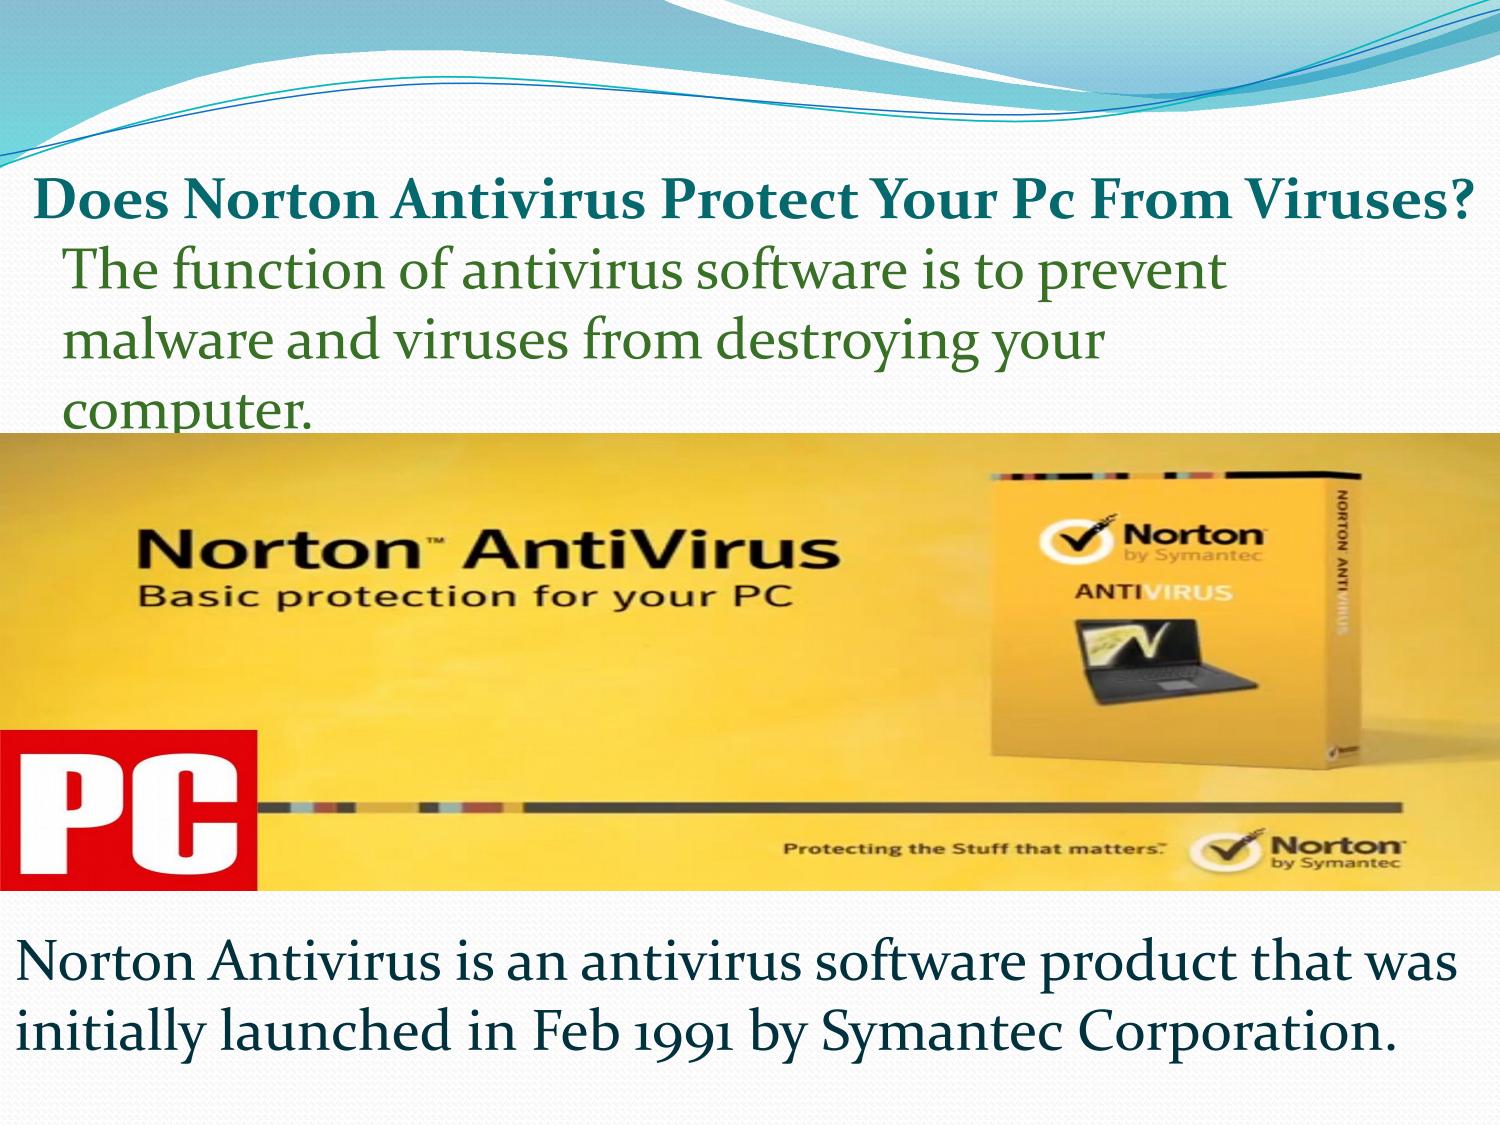 what is the function of norton antivirus software